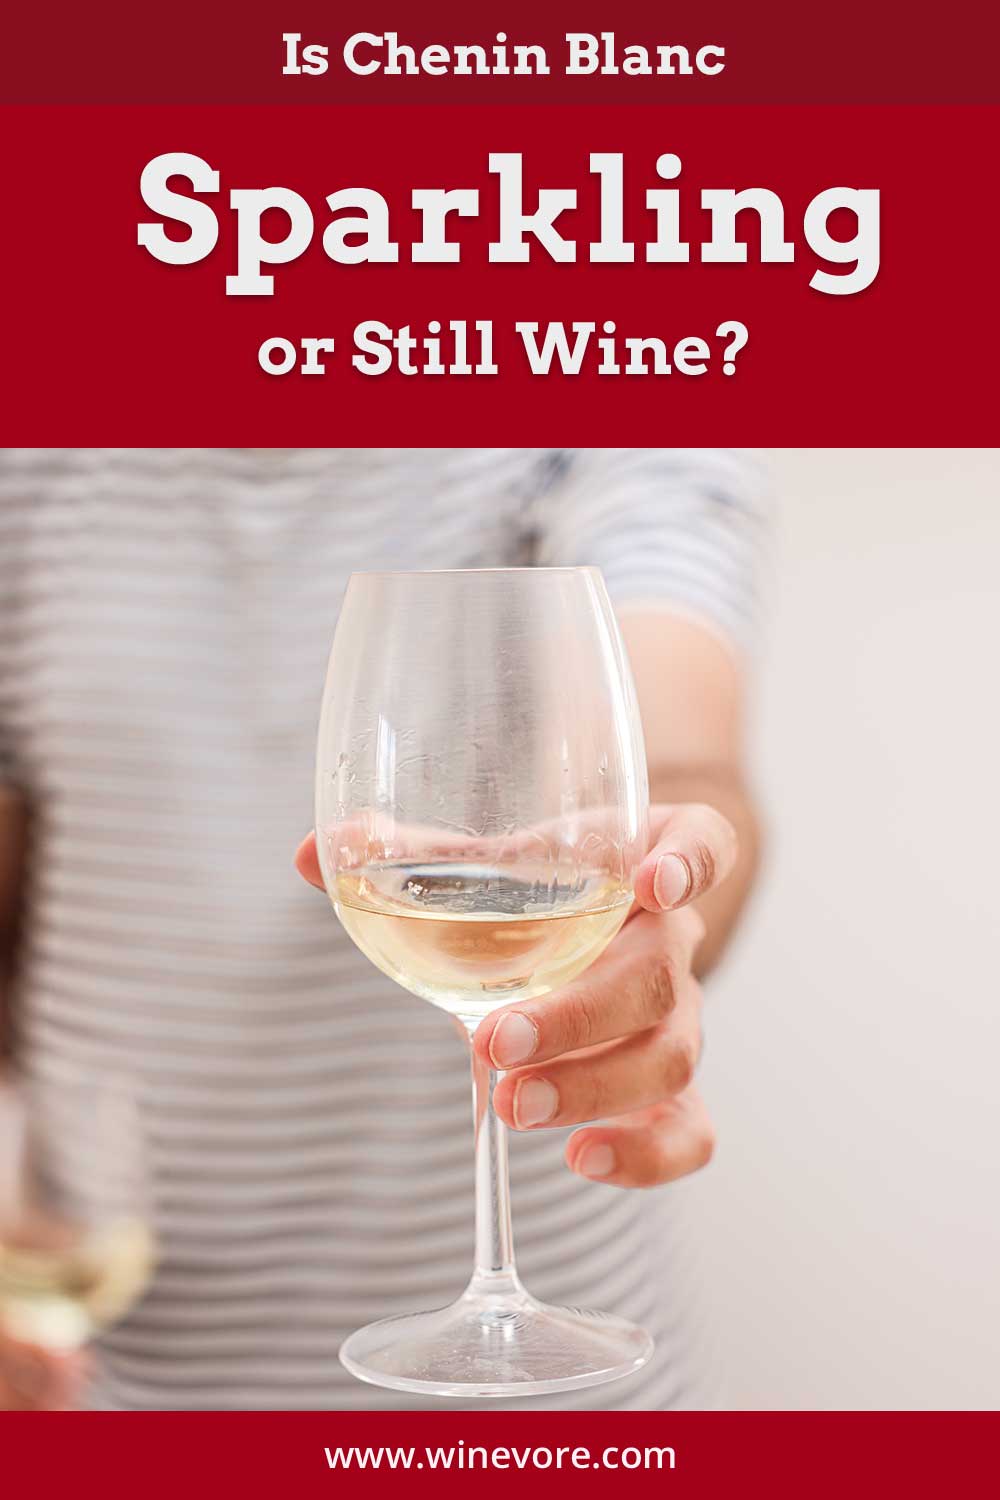 A glass of white wine in a person's hand - Is Chenin Blanc Sparkling or Still Wine?